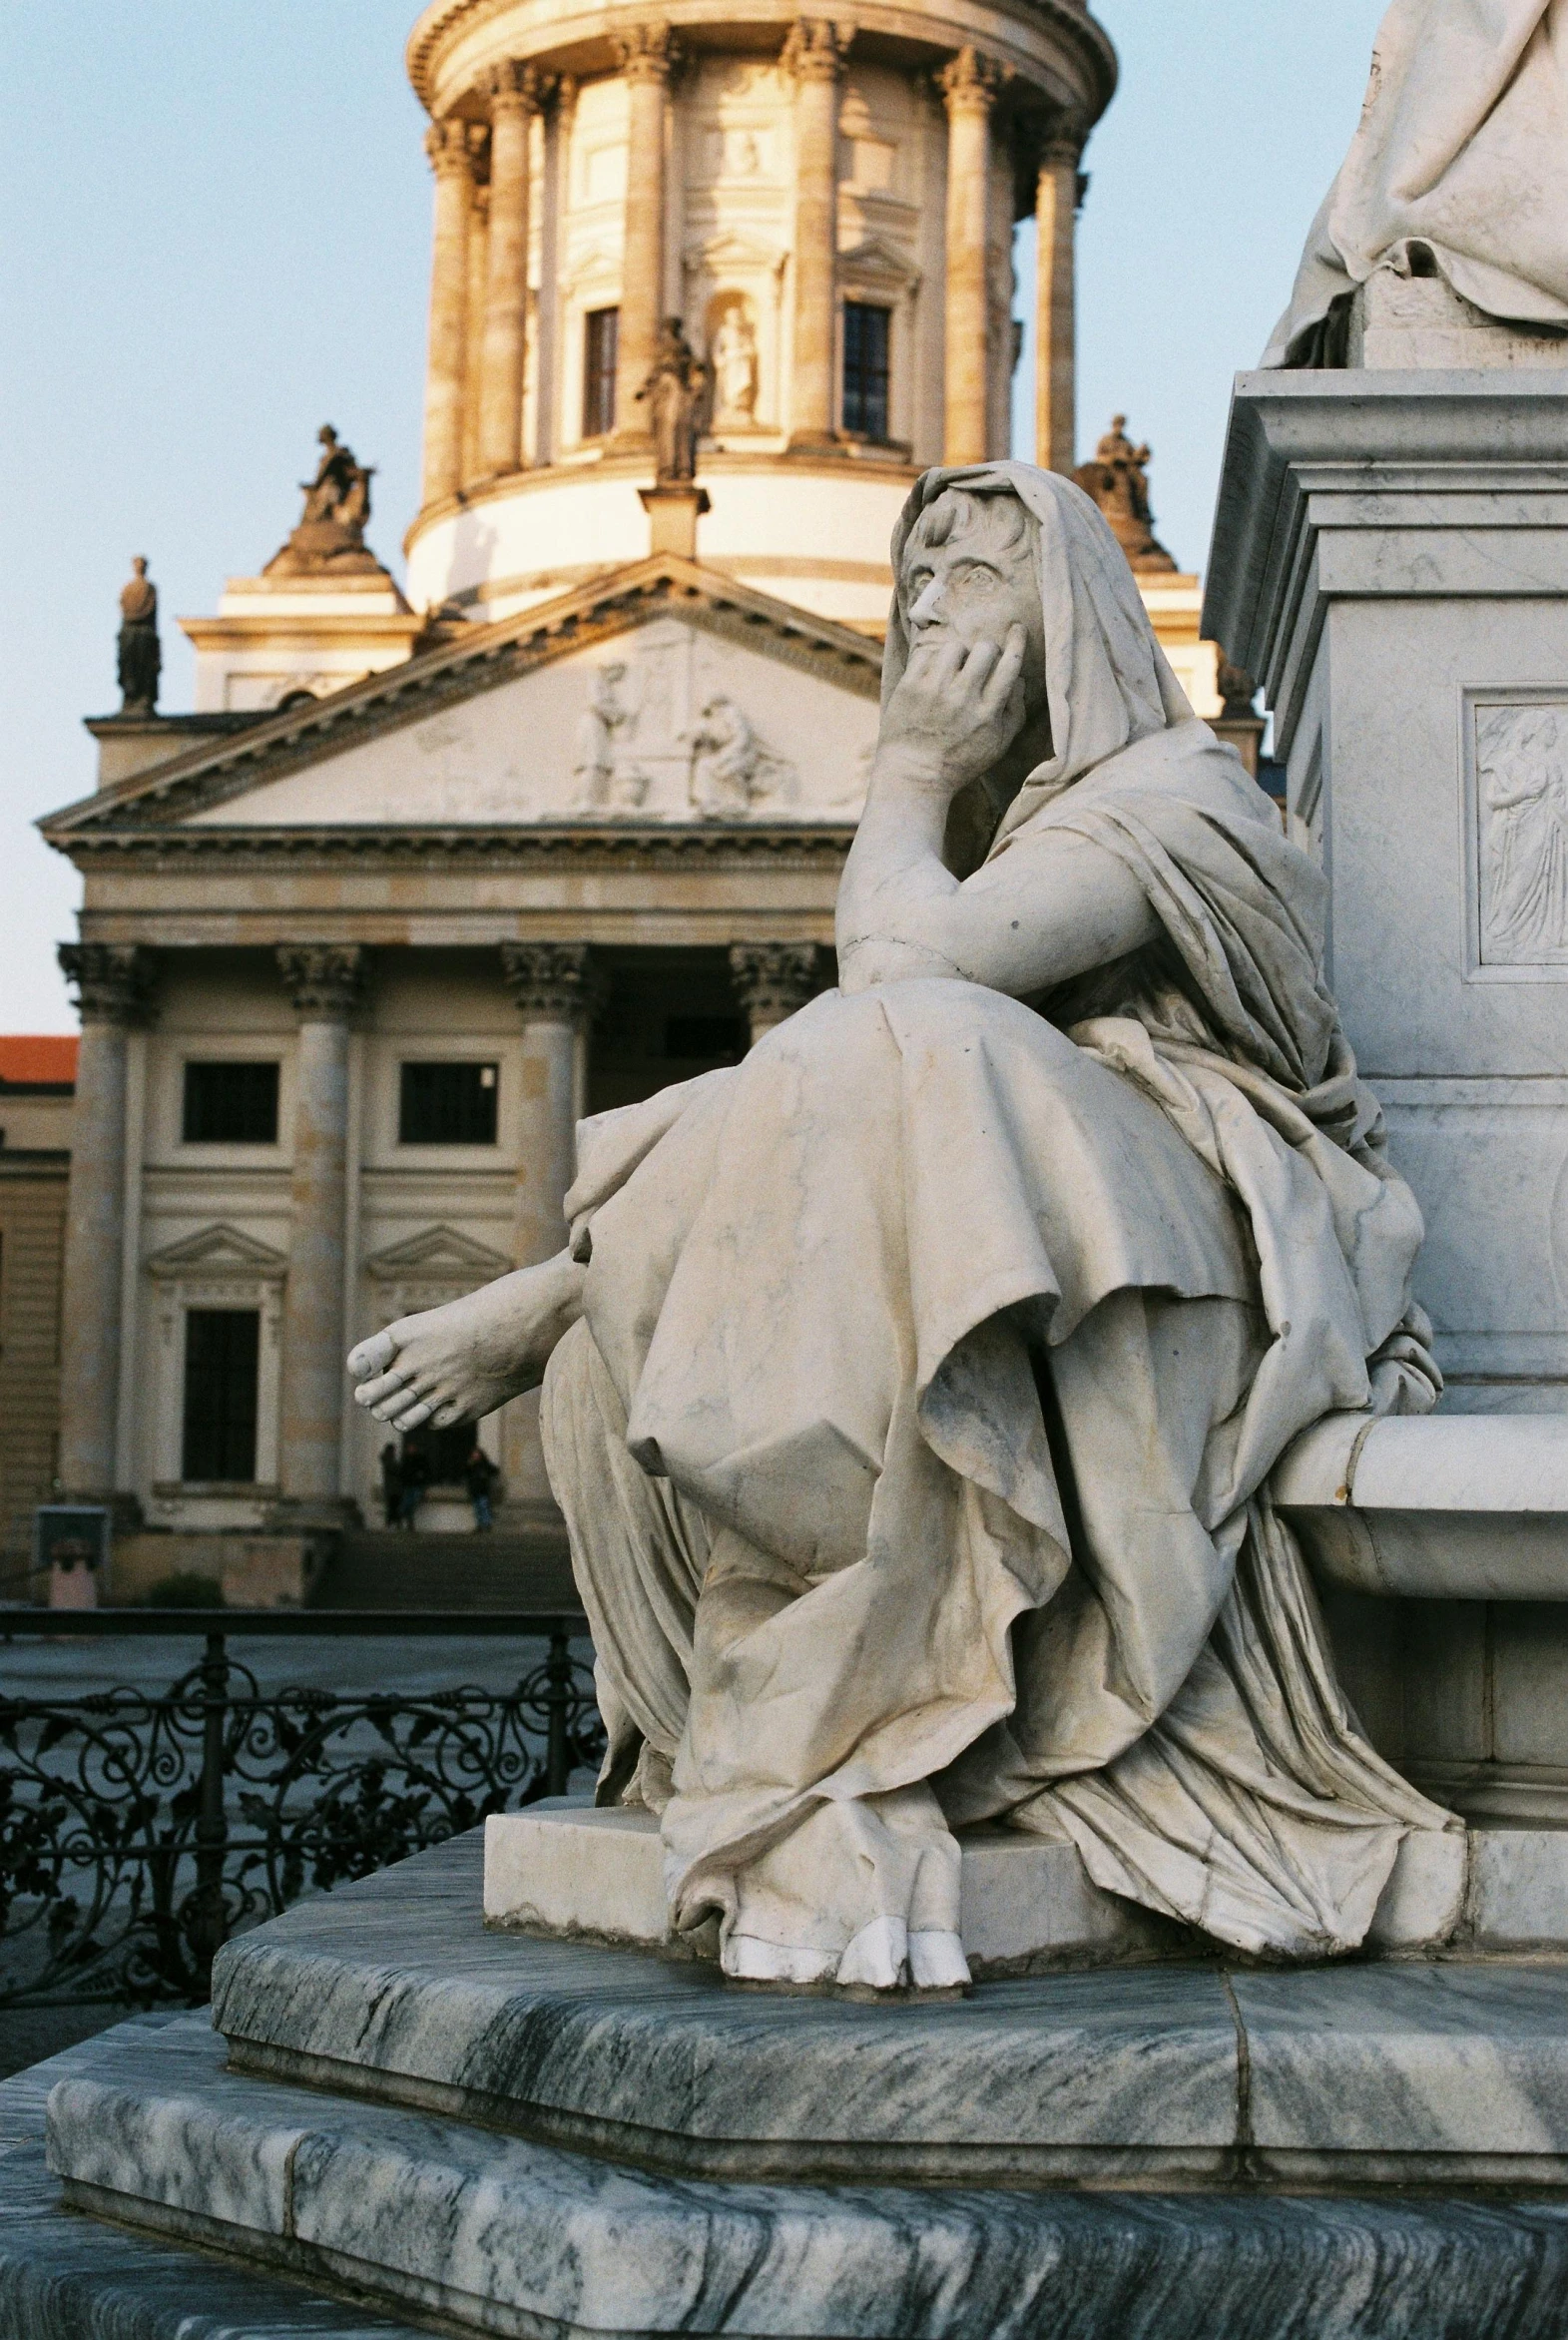 a statue of a woman sitting on a bench in front of a building, inspired by Friedrich Gauermann, neoclassicism, giant grave structures, robed renaissance scholar, she's sad, german renaissance architecture